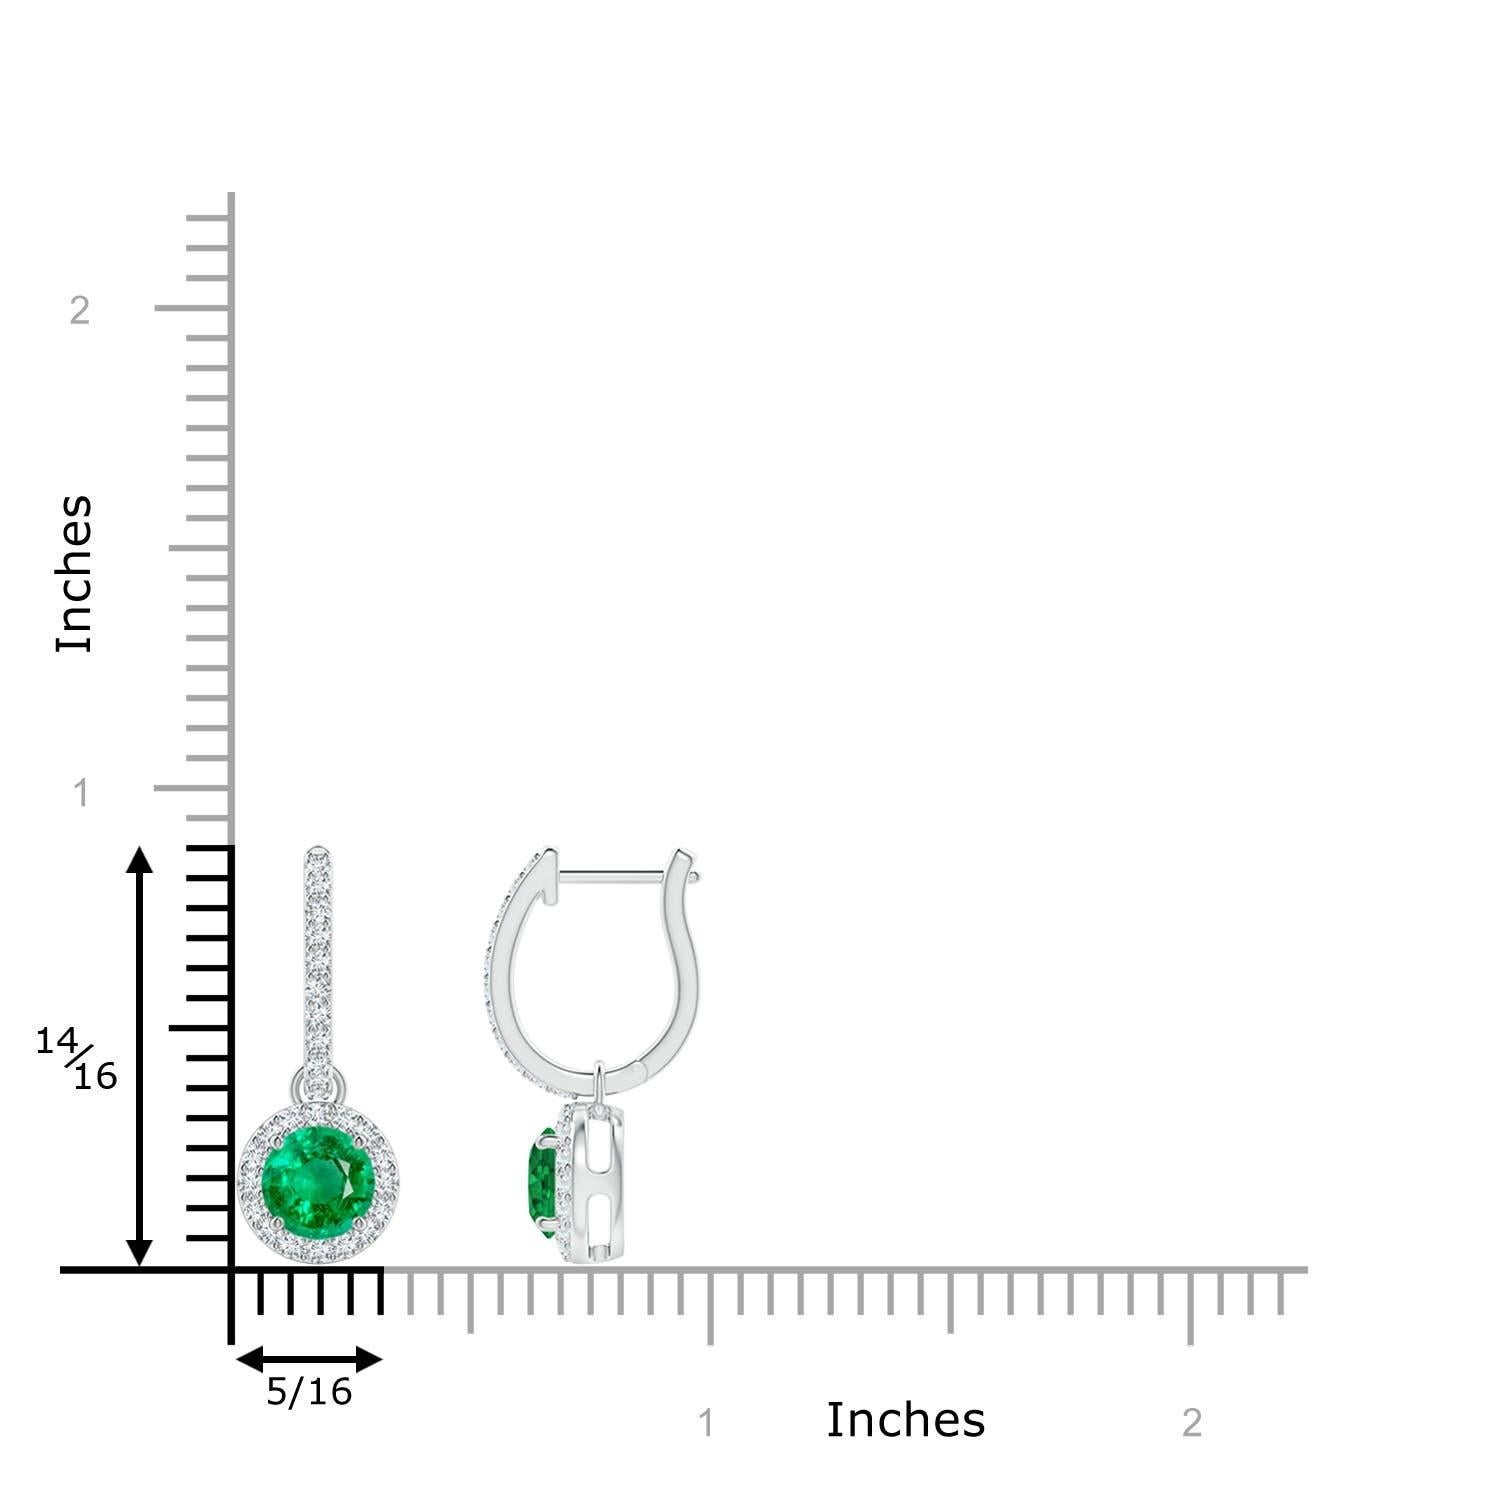 Nestled within a glimmering halo of round diamonds are round lush green emeralds in prong settings. The diamond accents on the hoop lend an additional touch of elegance to these emerald dangle earrings crafted in 14k white gold.
Emerald is the